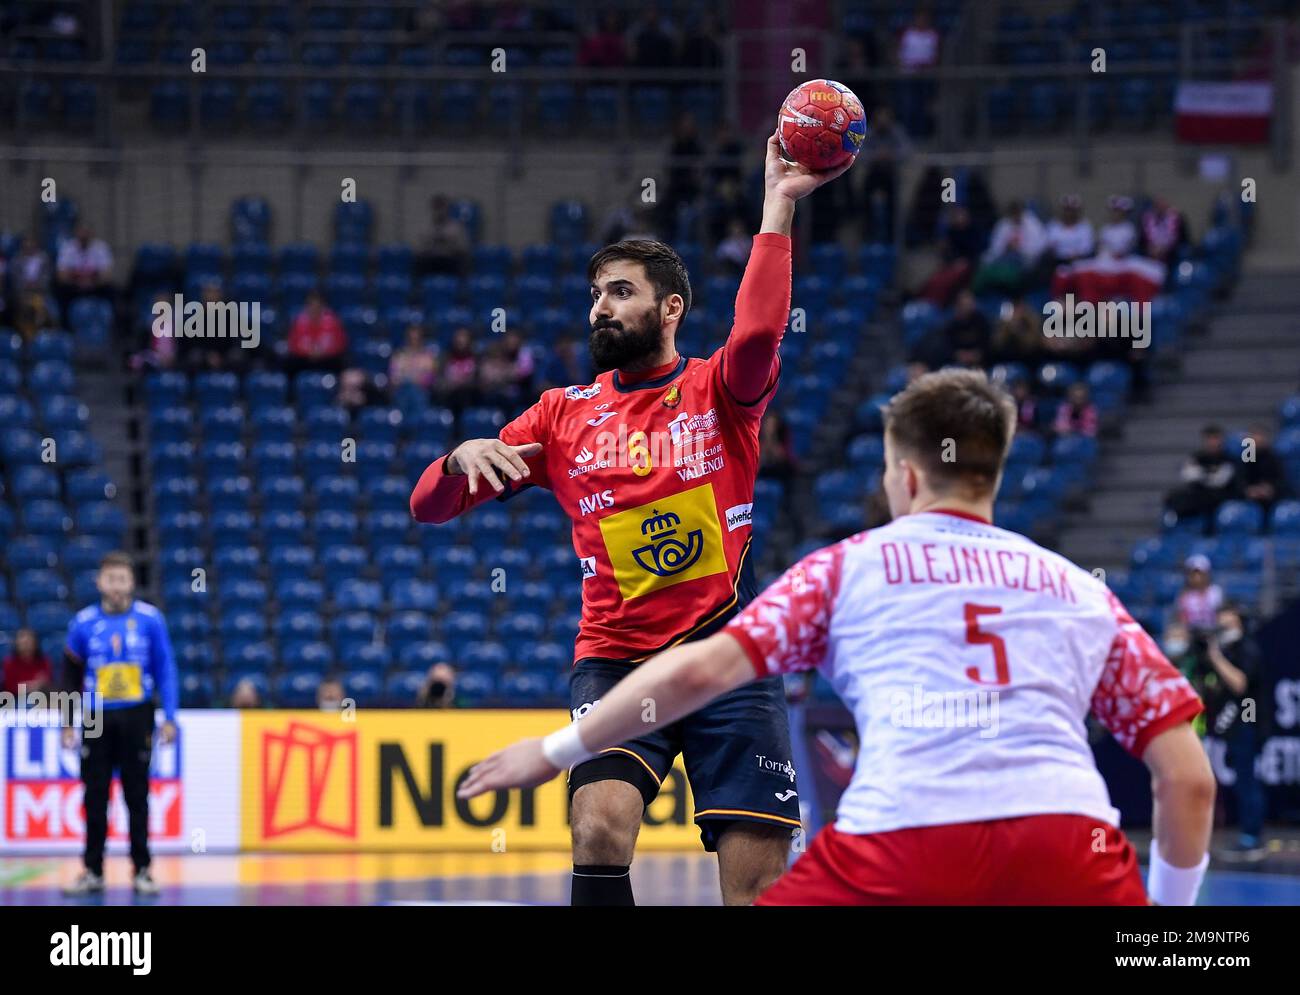 Cracow, Poland. 18th Jan, 2023. Jorge Maqueda Peno during IHF Men's World Championship match between Poland and Spain on January 18, 2023 in Cracow, Poland. (Photo by PressFocus/Sipa USA) Credit: Sipa USA/Alamy Live News Stock Photo